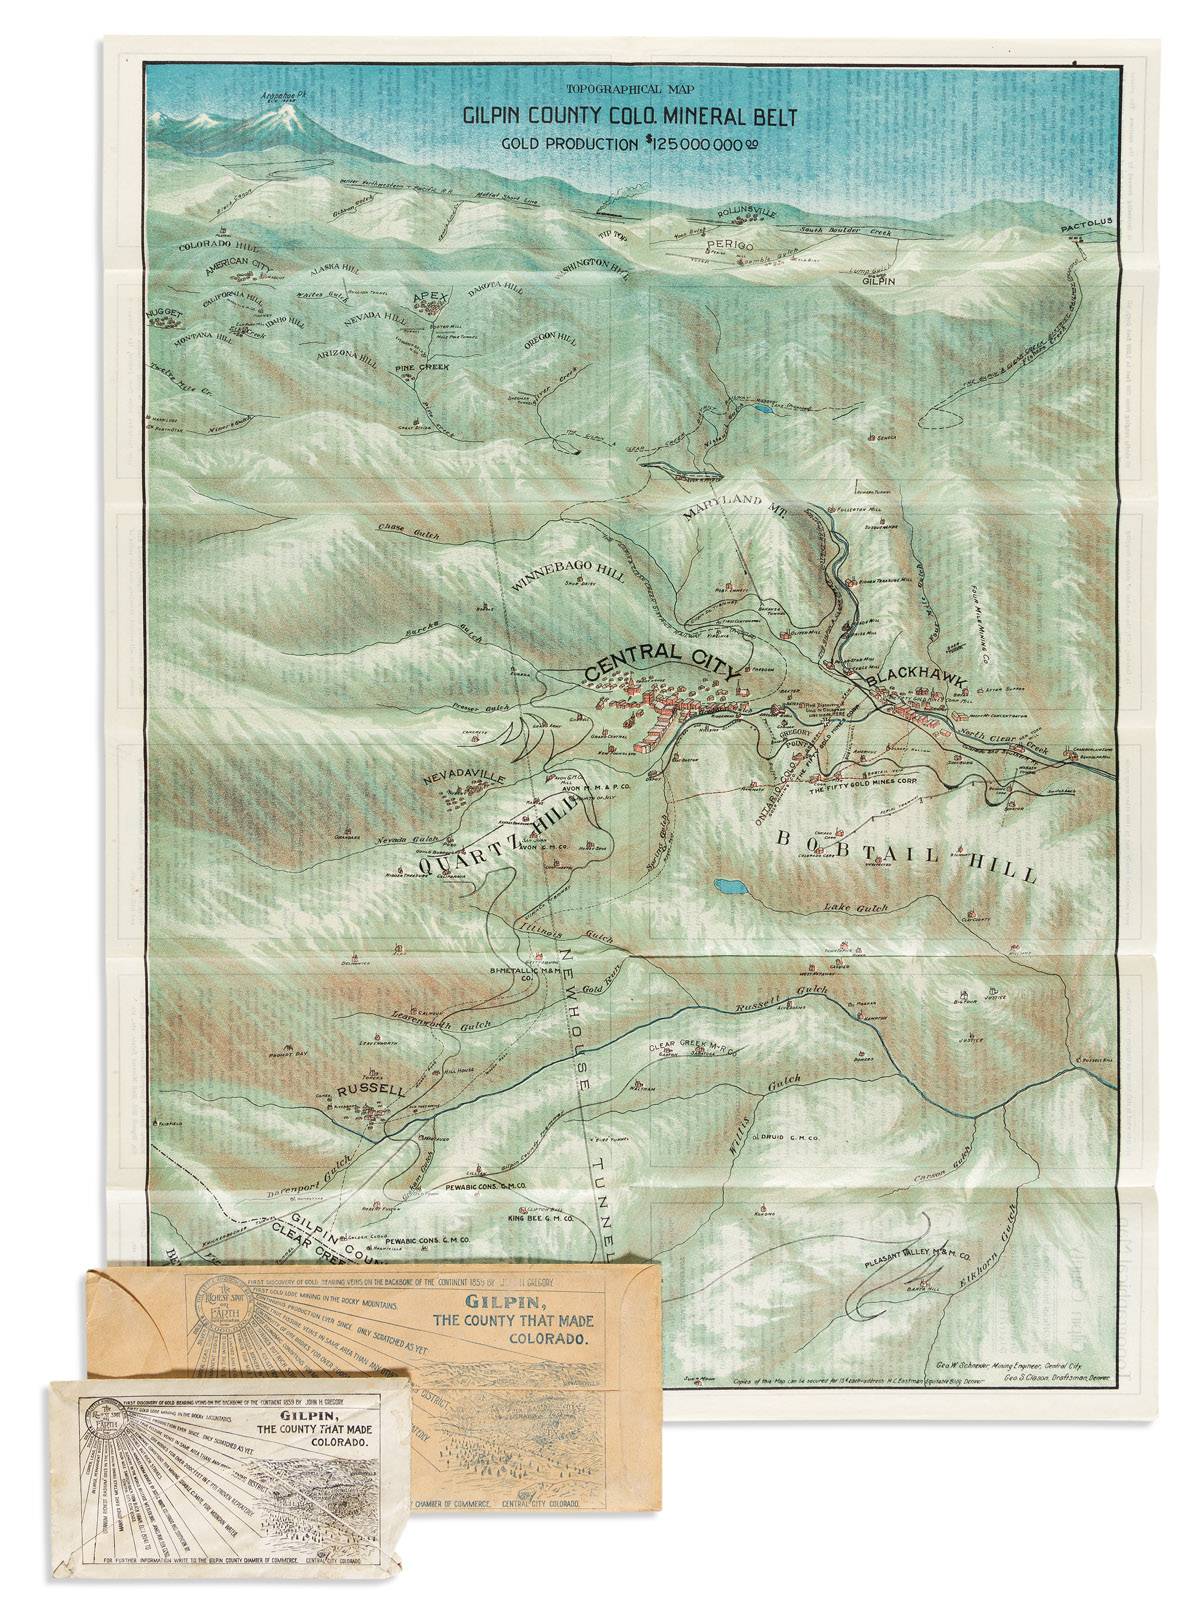 (COLORADO -- GOLD MINING.) George S. Clason. Topographical Map Gilpin County Colo. Mineral Belt Gold Production $125,000,000.00.